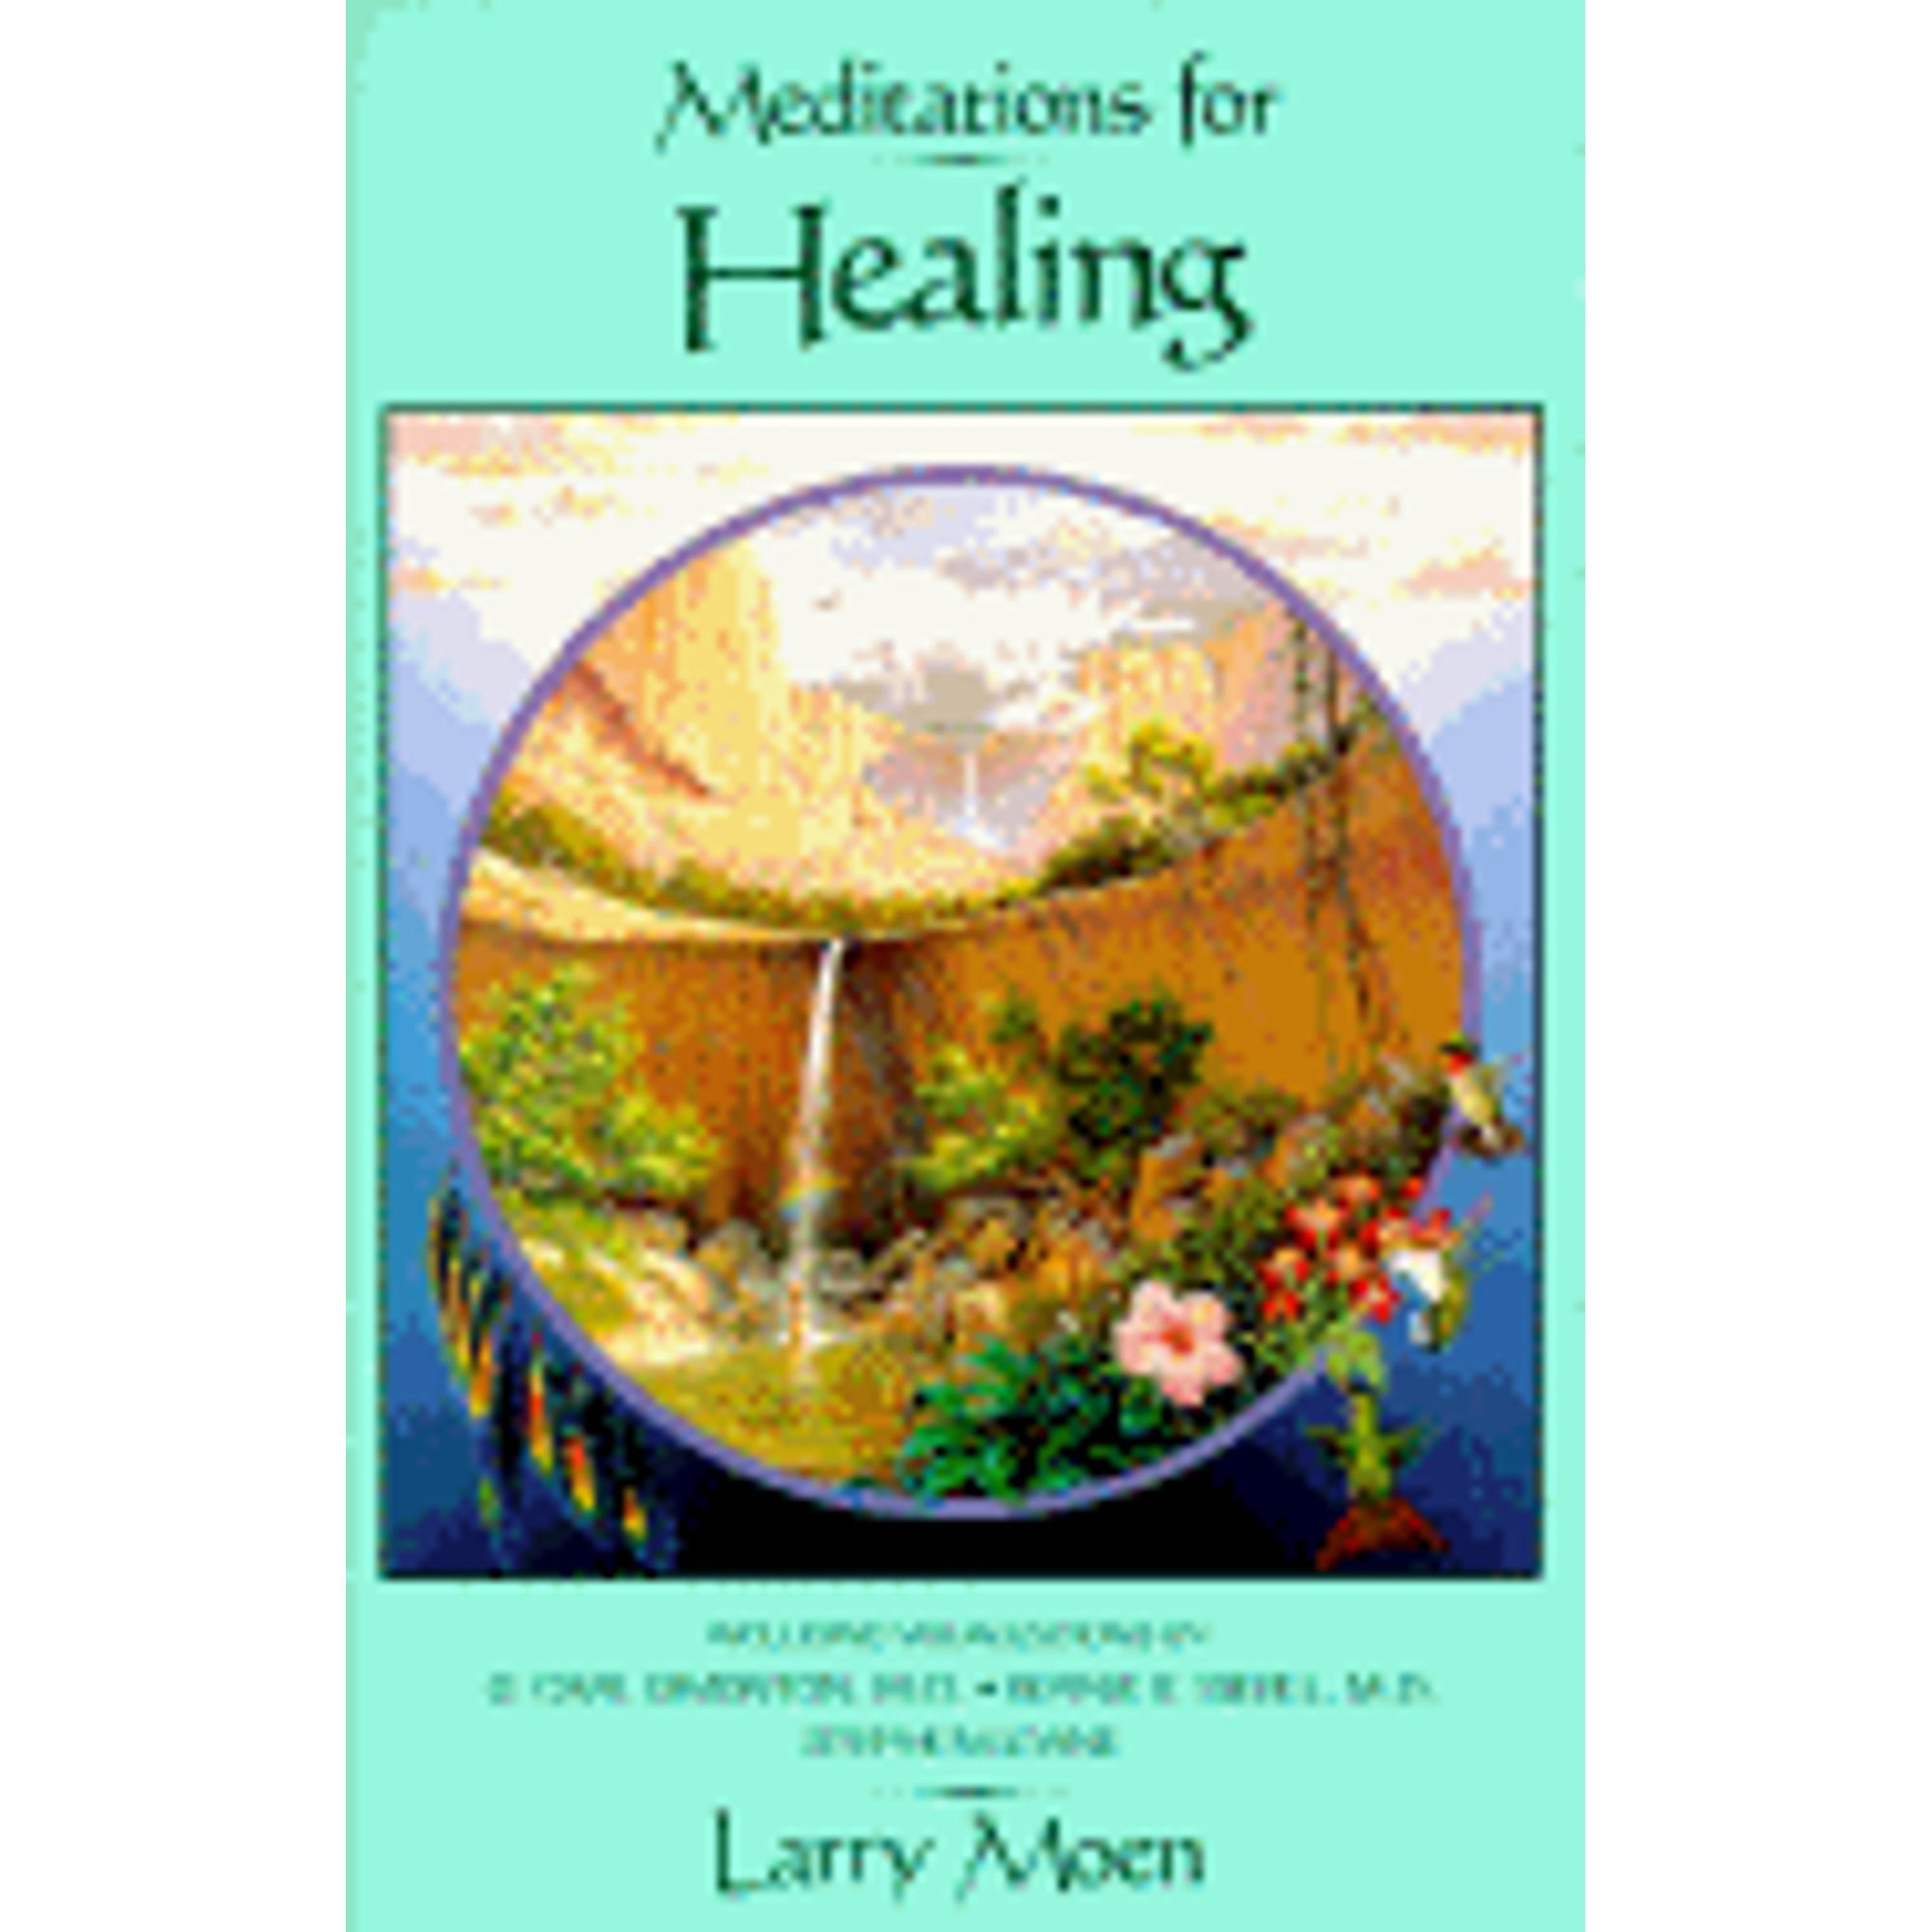 Meditations for Healing: Edited by Larry Moen (Pre-Owned Paperback